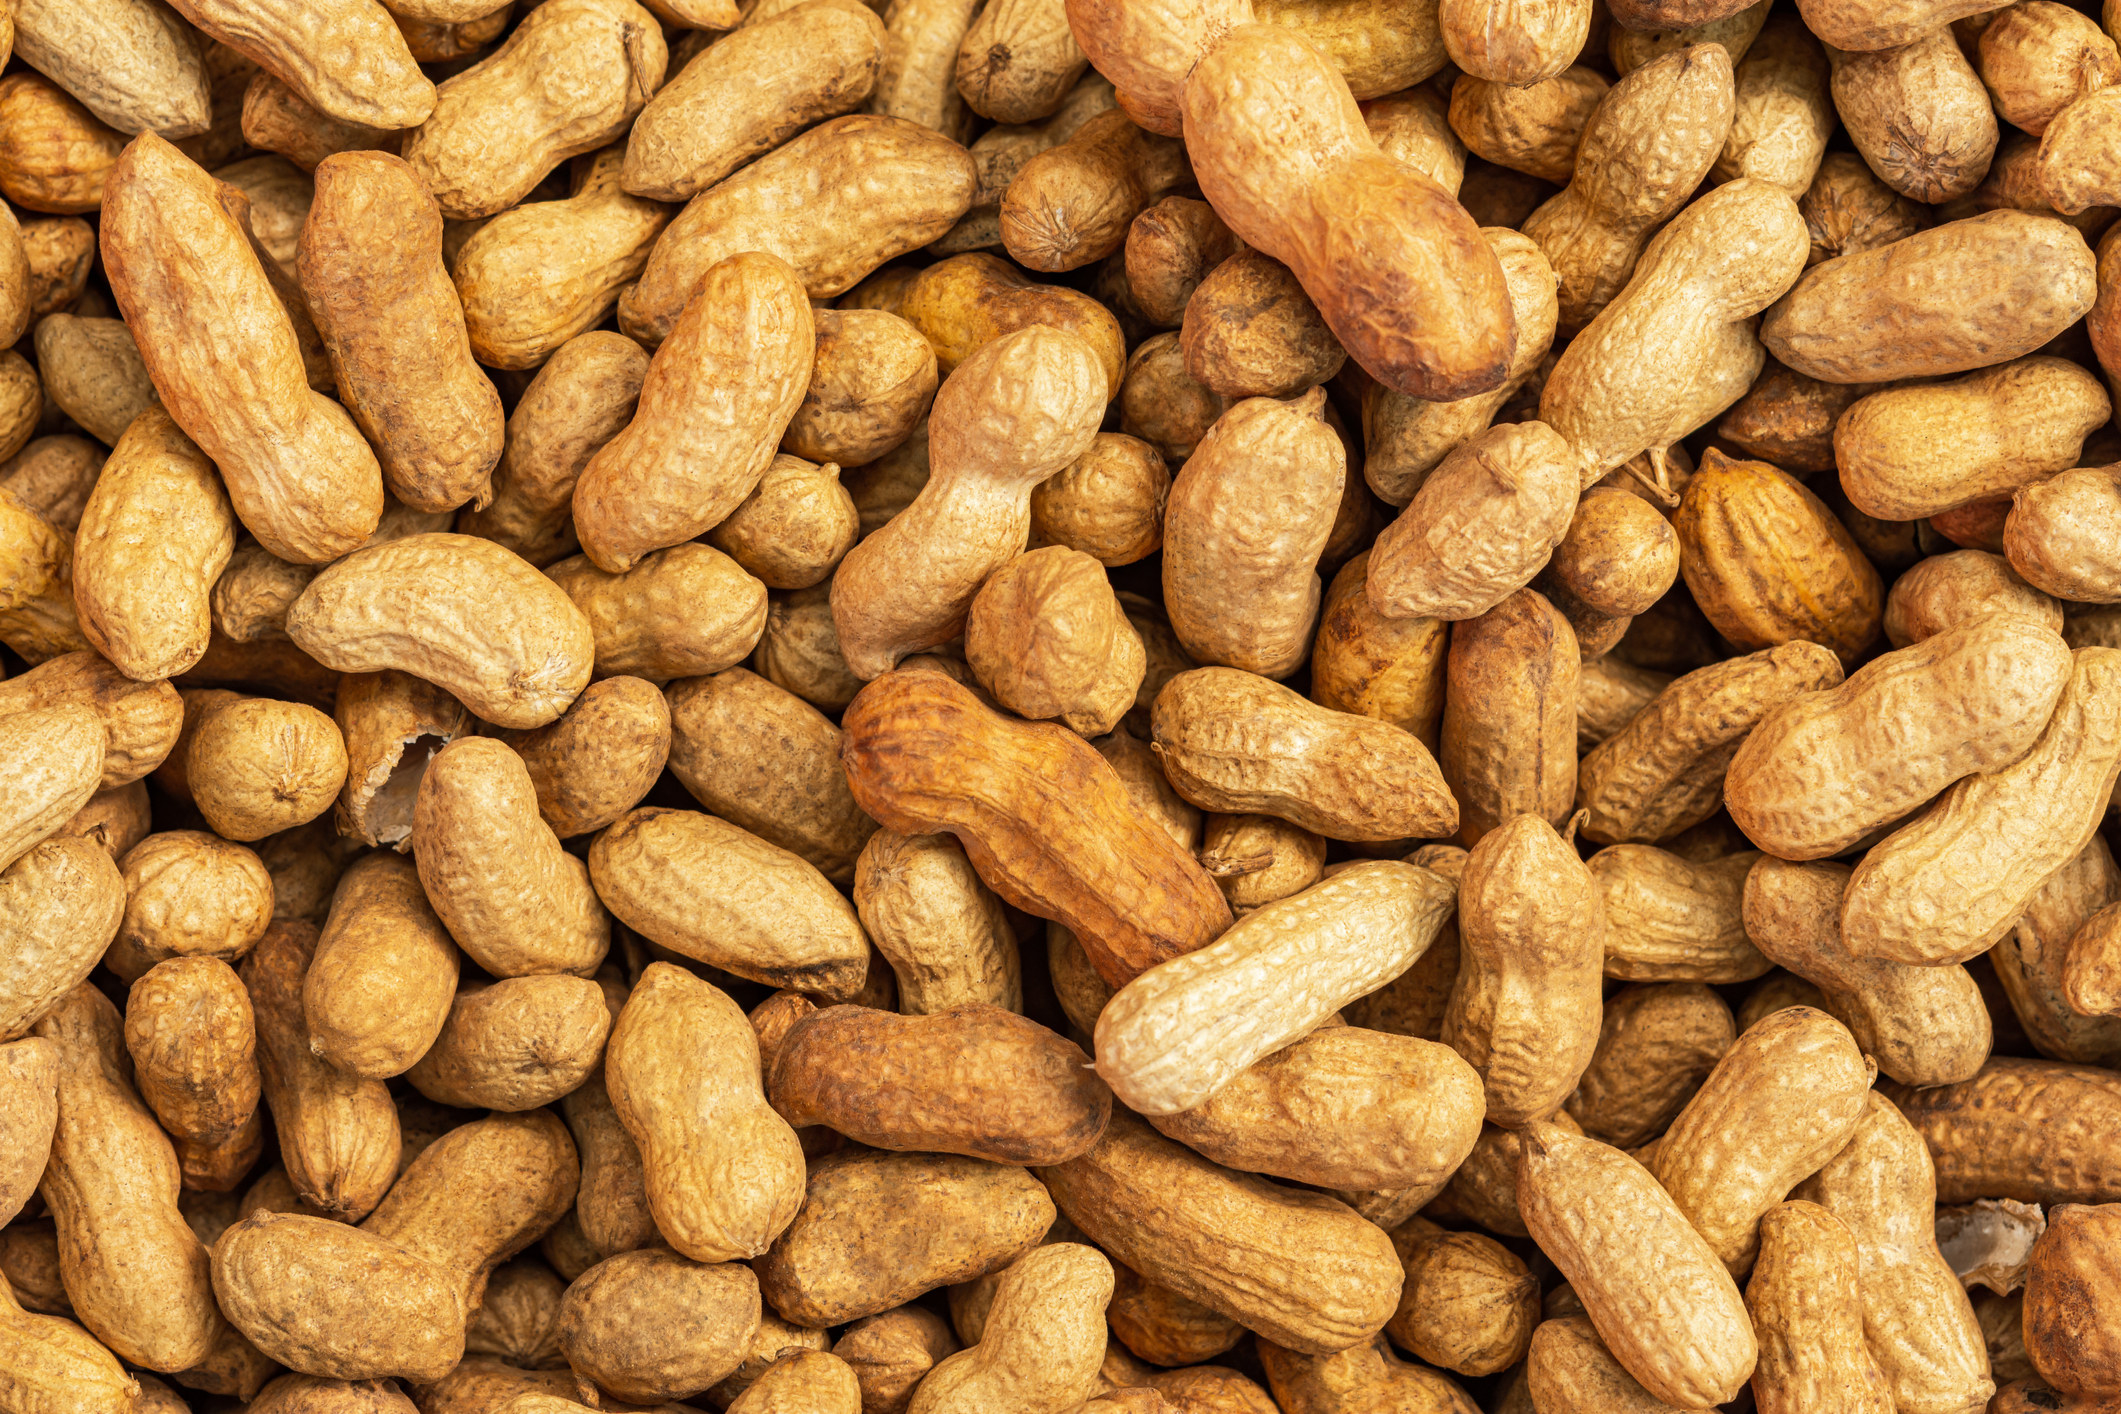 A pile of peanuts.